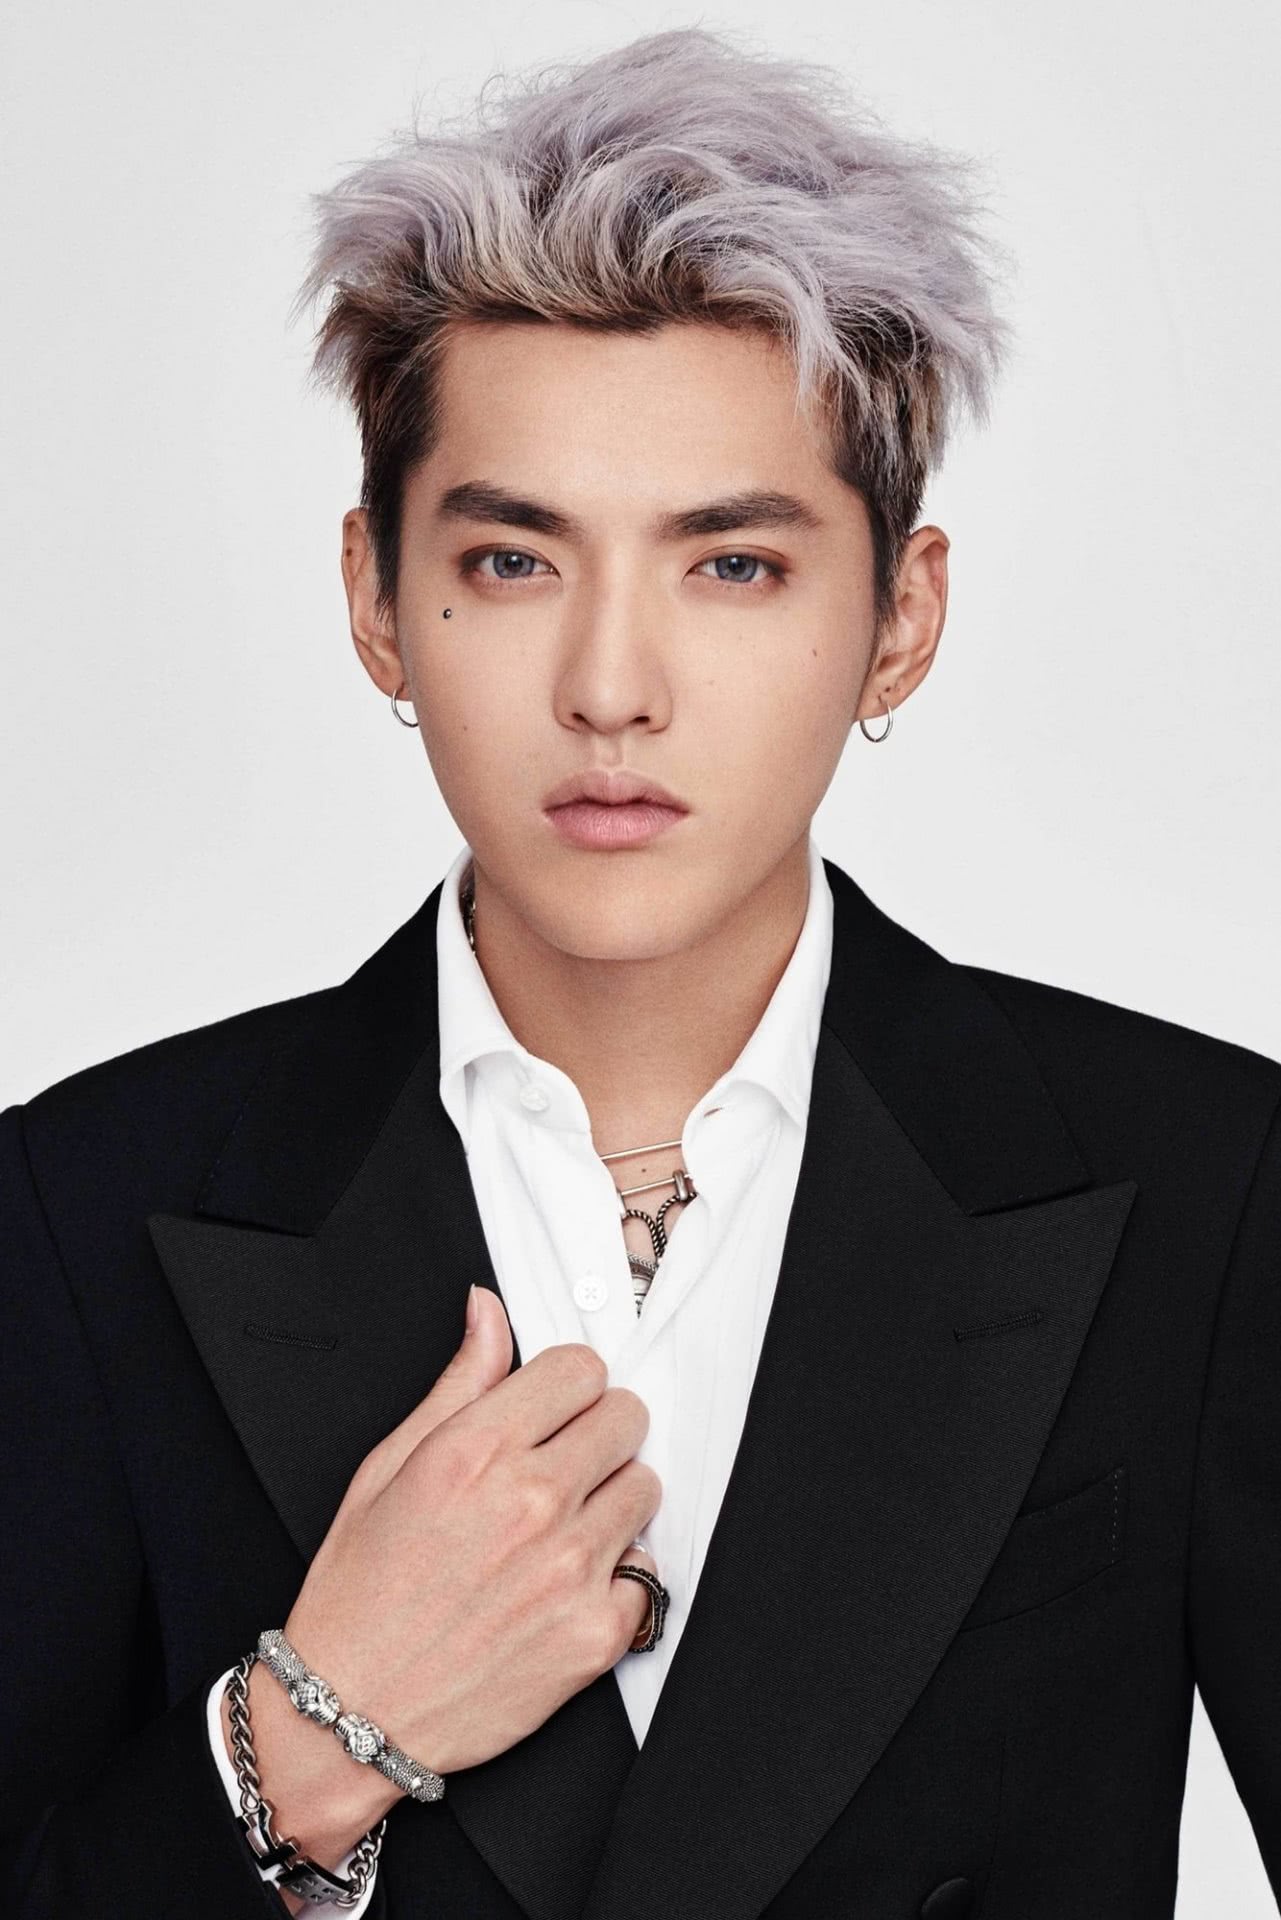 Kris Wu: from K-pop's Exo to solo singing star, actor…